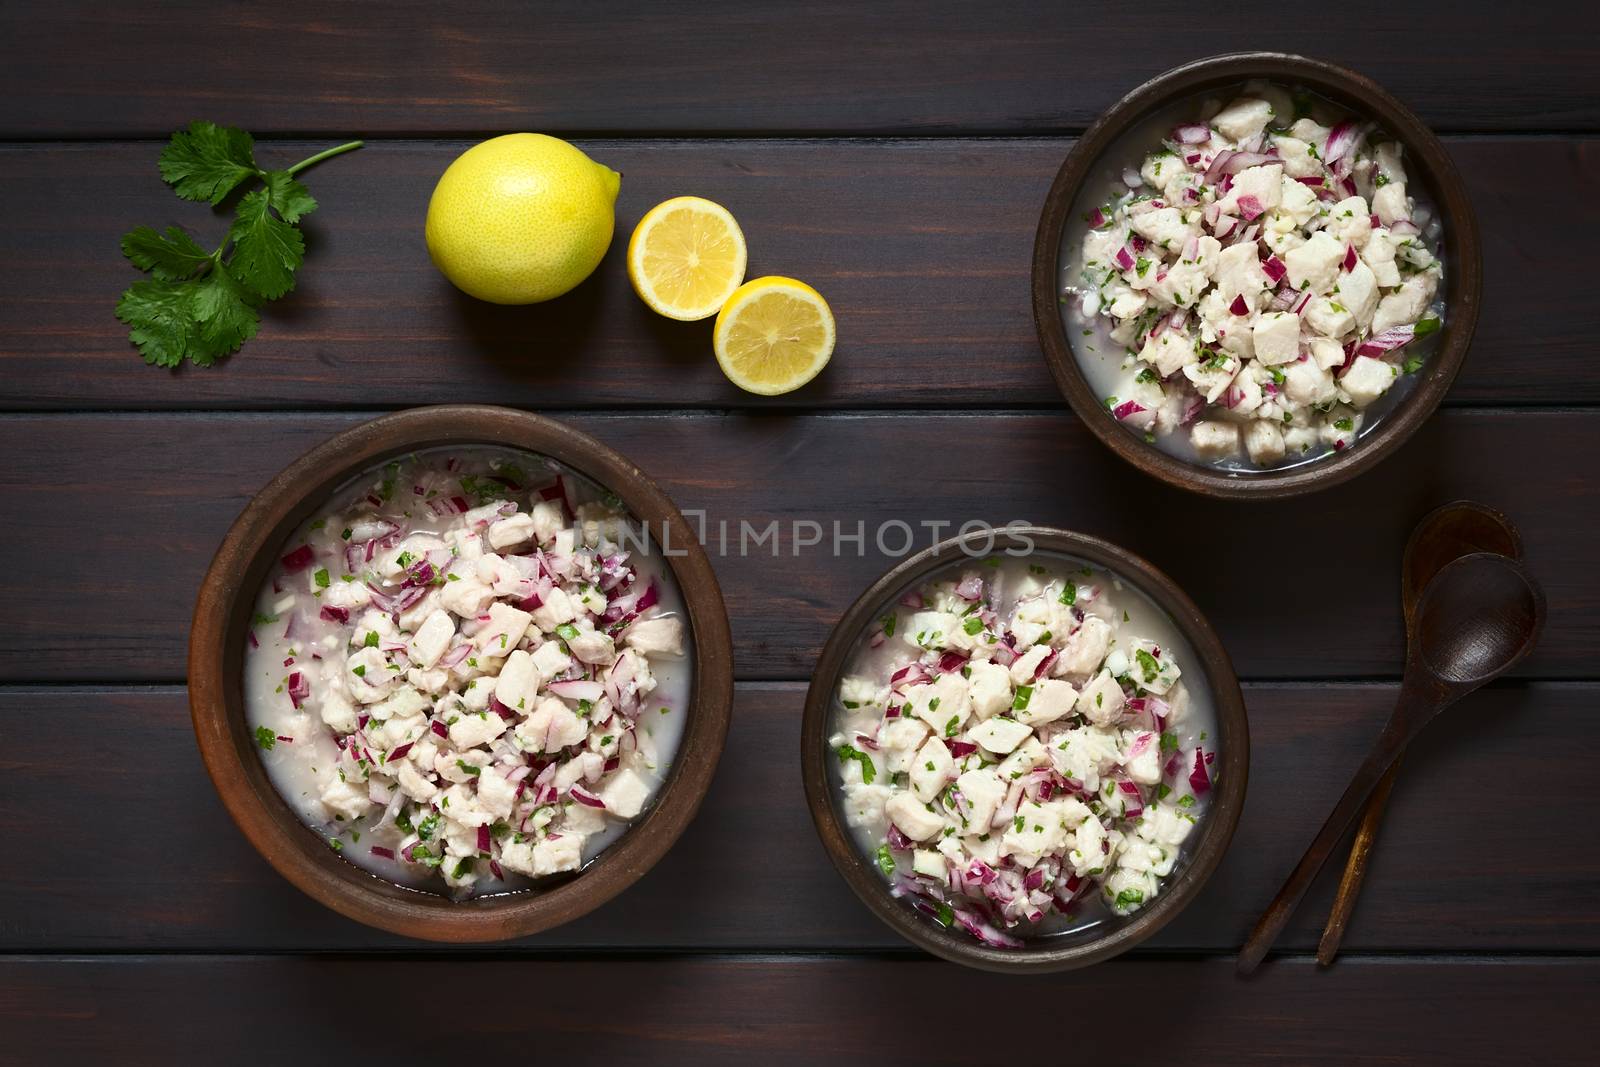 Chilean Ceviche made of Southern Ray's bream fish (lat. Brama Australis, Spanish Reineta), onion, garlic and cilantro marinated in lemon juice served in rustic bowls. Photographed overhead on dark wood with natural light.